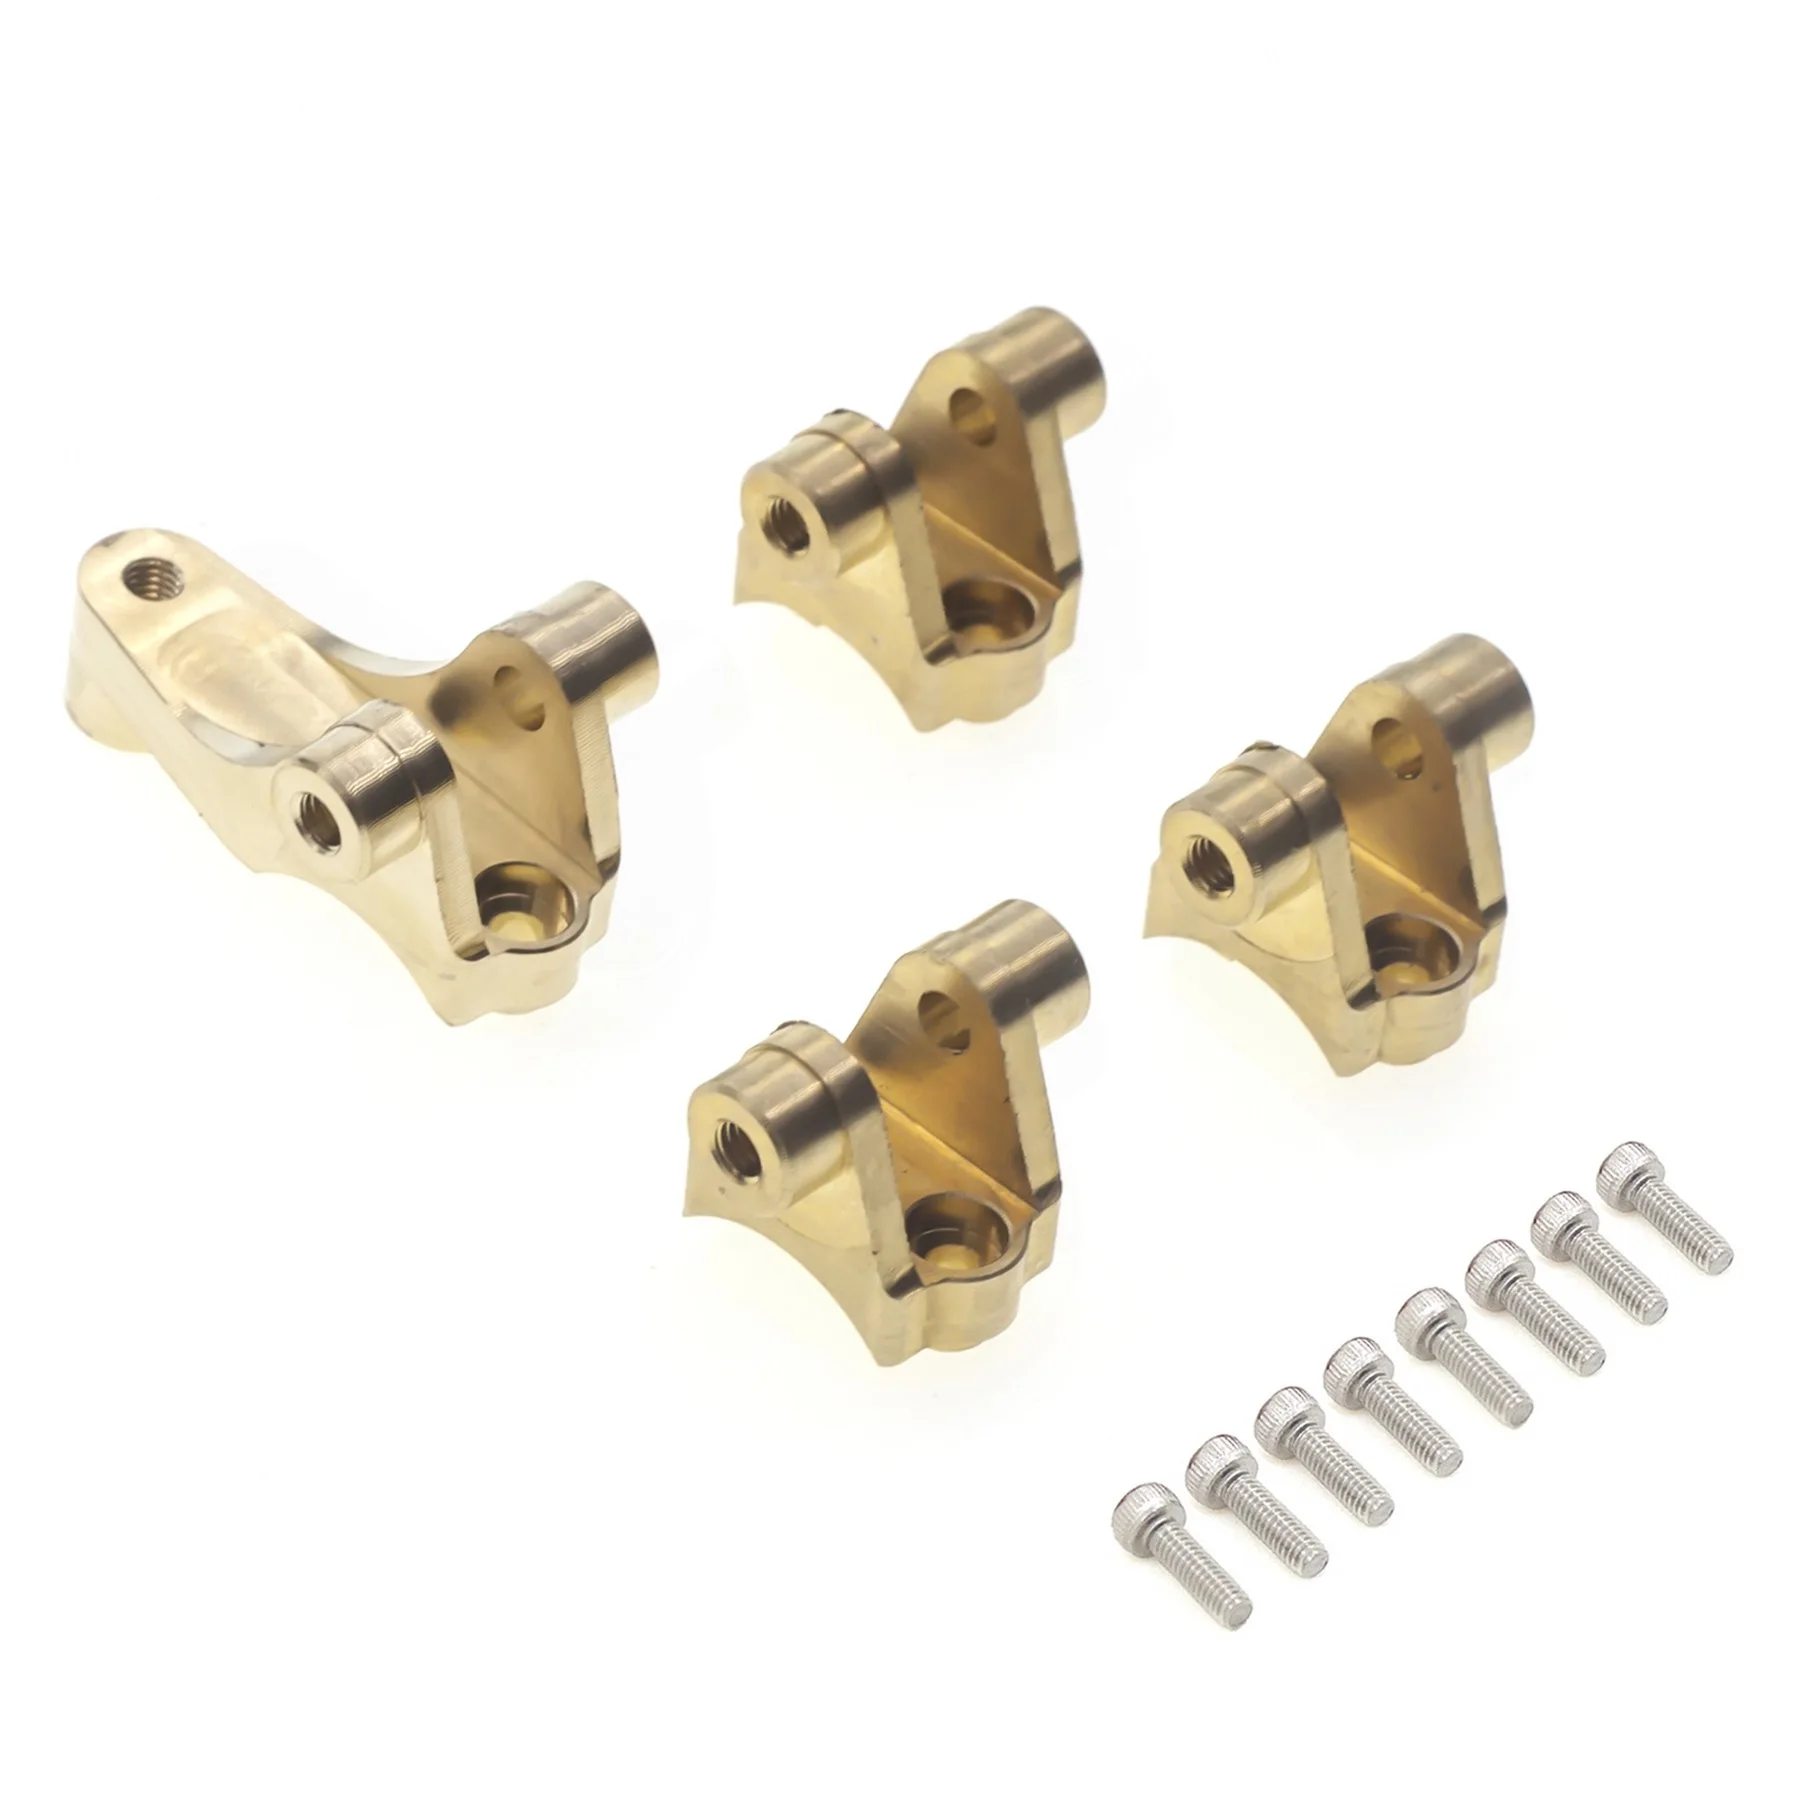 

4pcs Brass Front and Rear Axle Lower Shock Mount Suspension Links Stand for Traxxas TRX4 1/10 RC Crawler Car Upgrade Parts